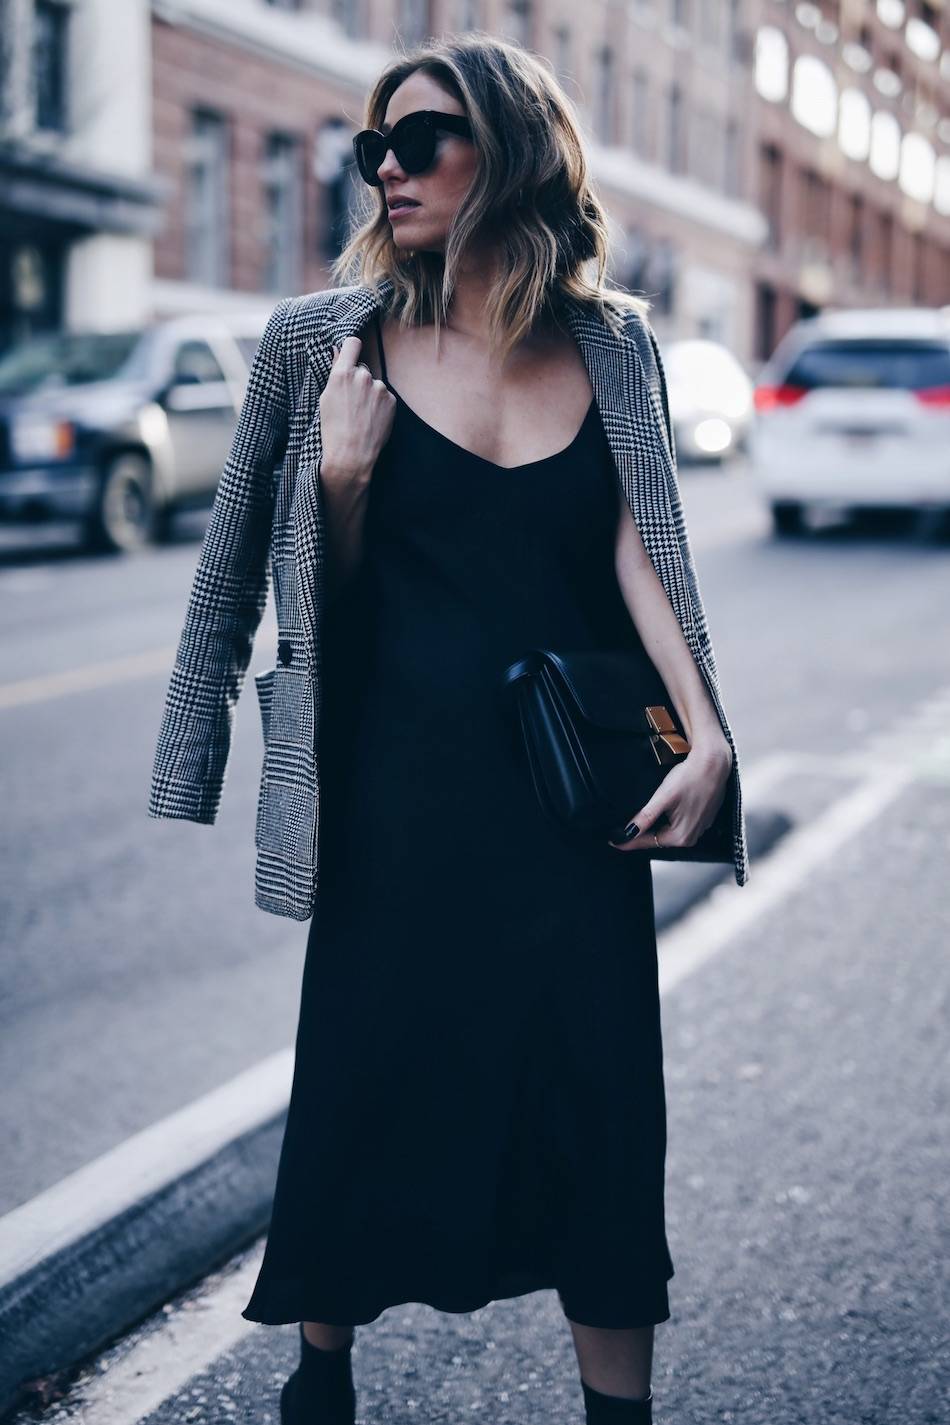 Style and beauty blogger Jill Lansky of The August Diaries top 5 slip dresses you need now